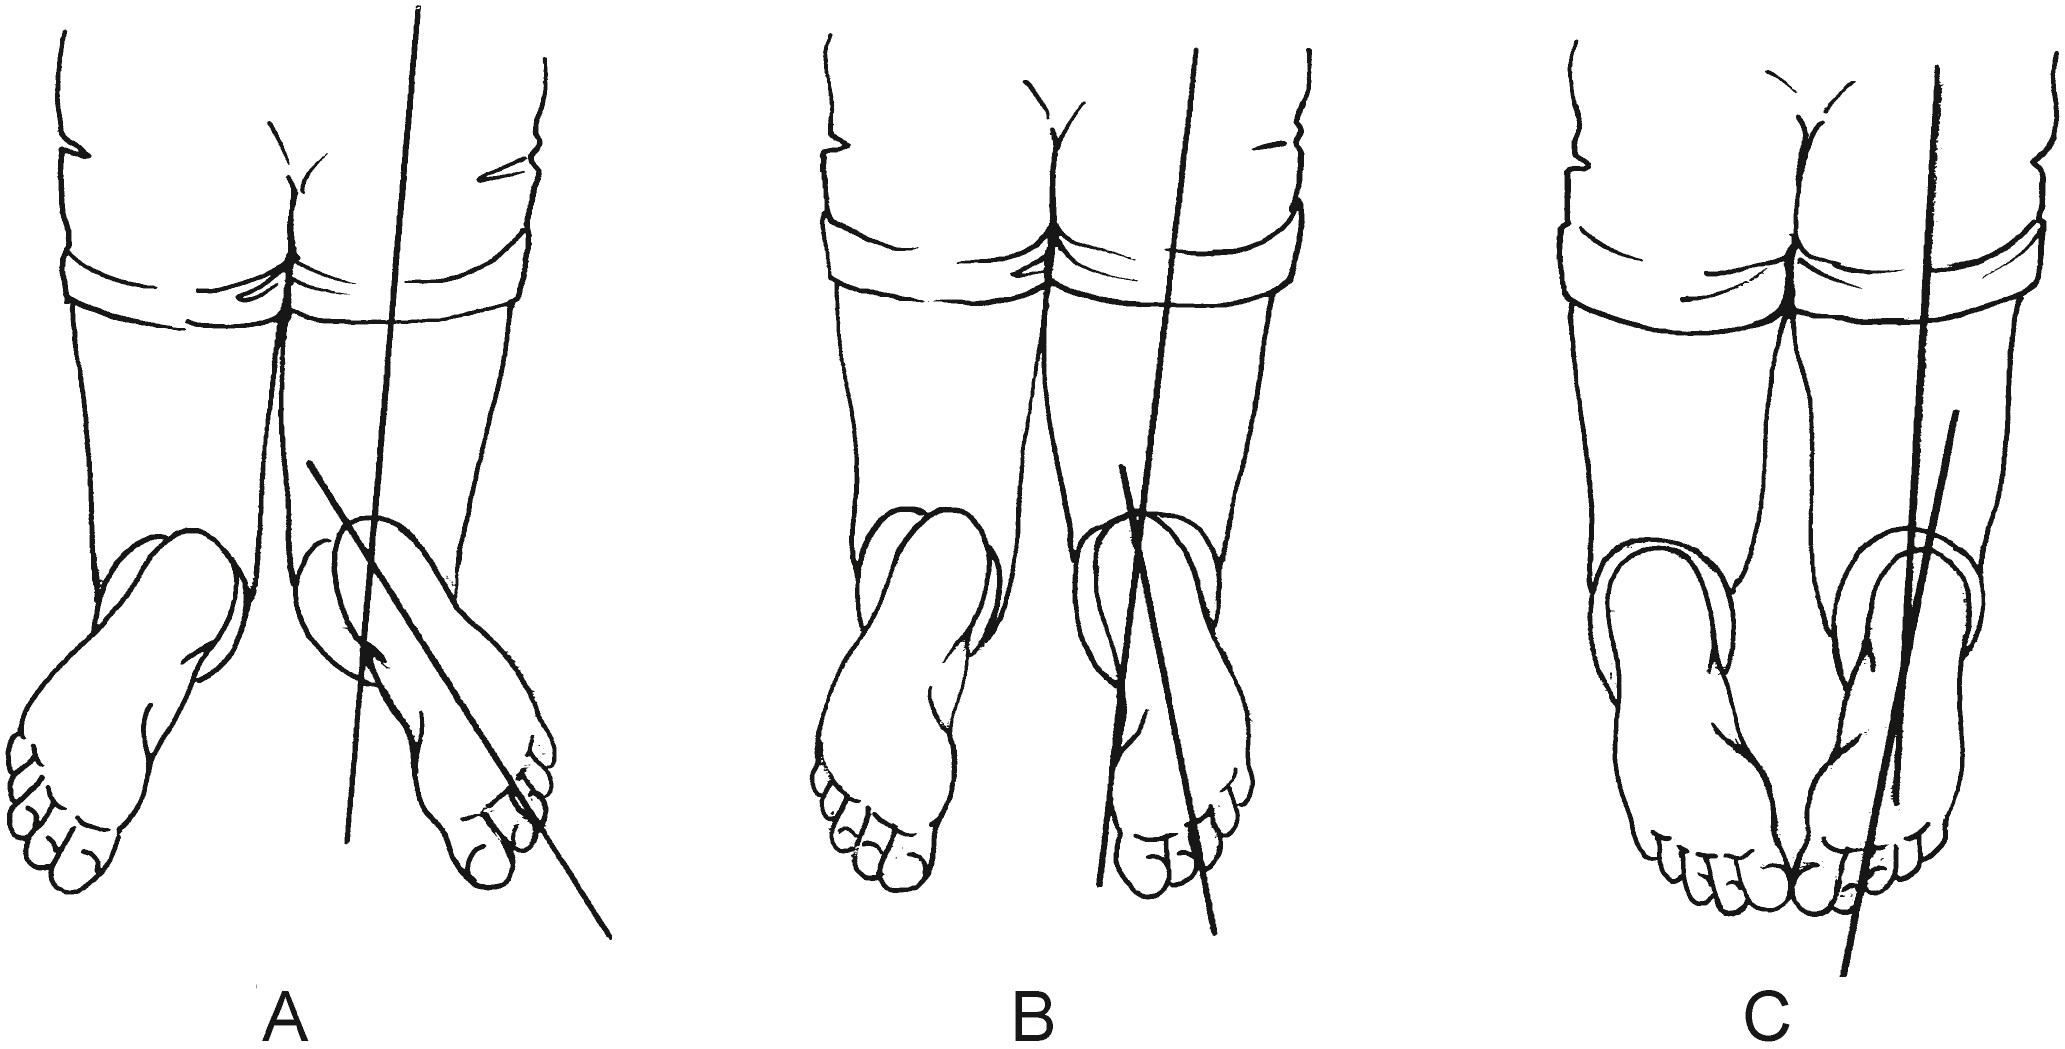 Fig. 45.6, Thigh-foot angle. With the child in the prone position and the knees flexed and approximated, the long axis of the foot can be compared with the long axis of the thigh. The long axis of the foot bisects the heel and the third or middle toe. A, External tibial torsion produces excessive outward rotation. B, Normal alignment is characterized by slight external rotation. C, Internal tibial torsion produces inward rotation.